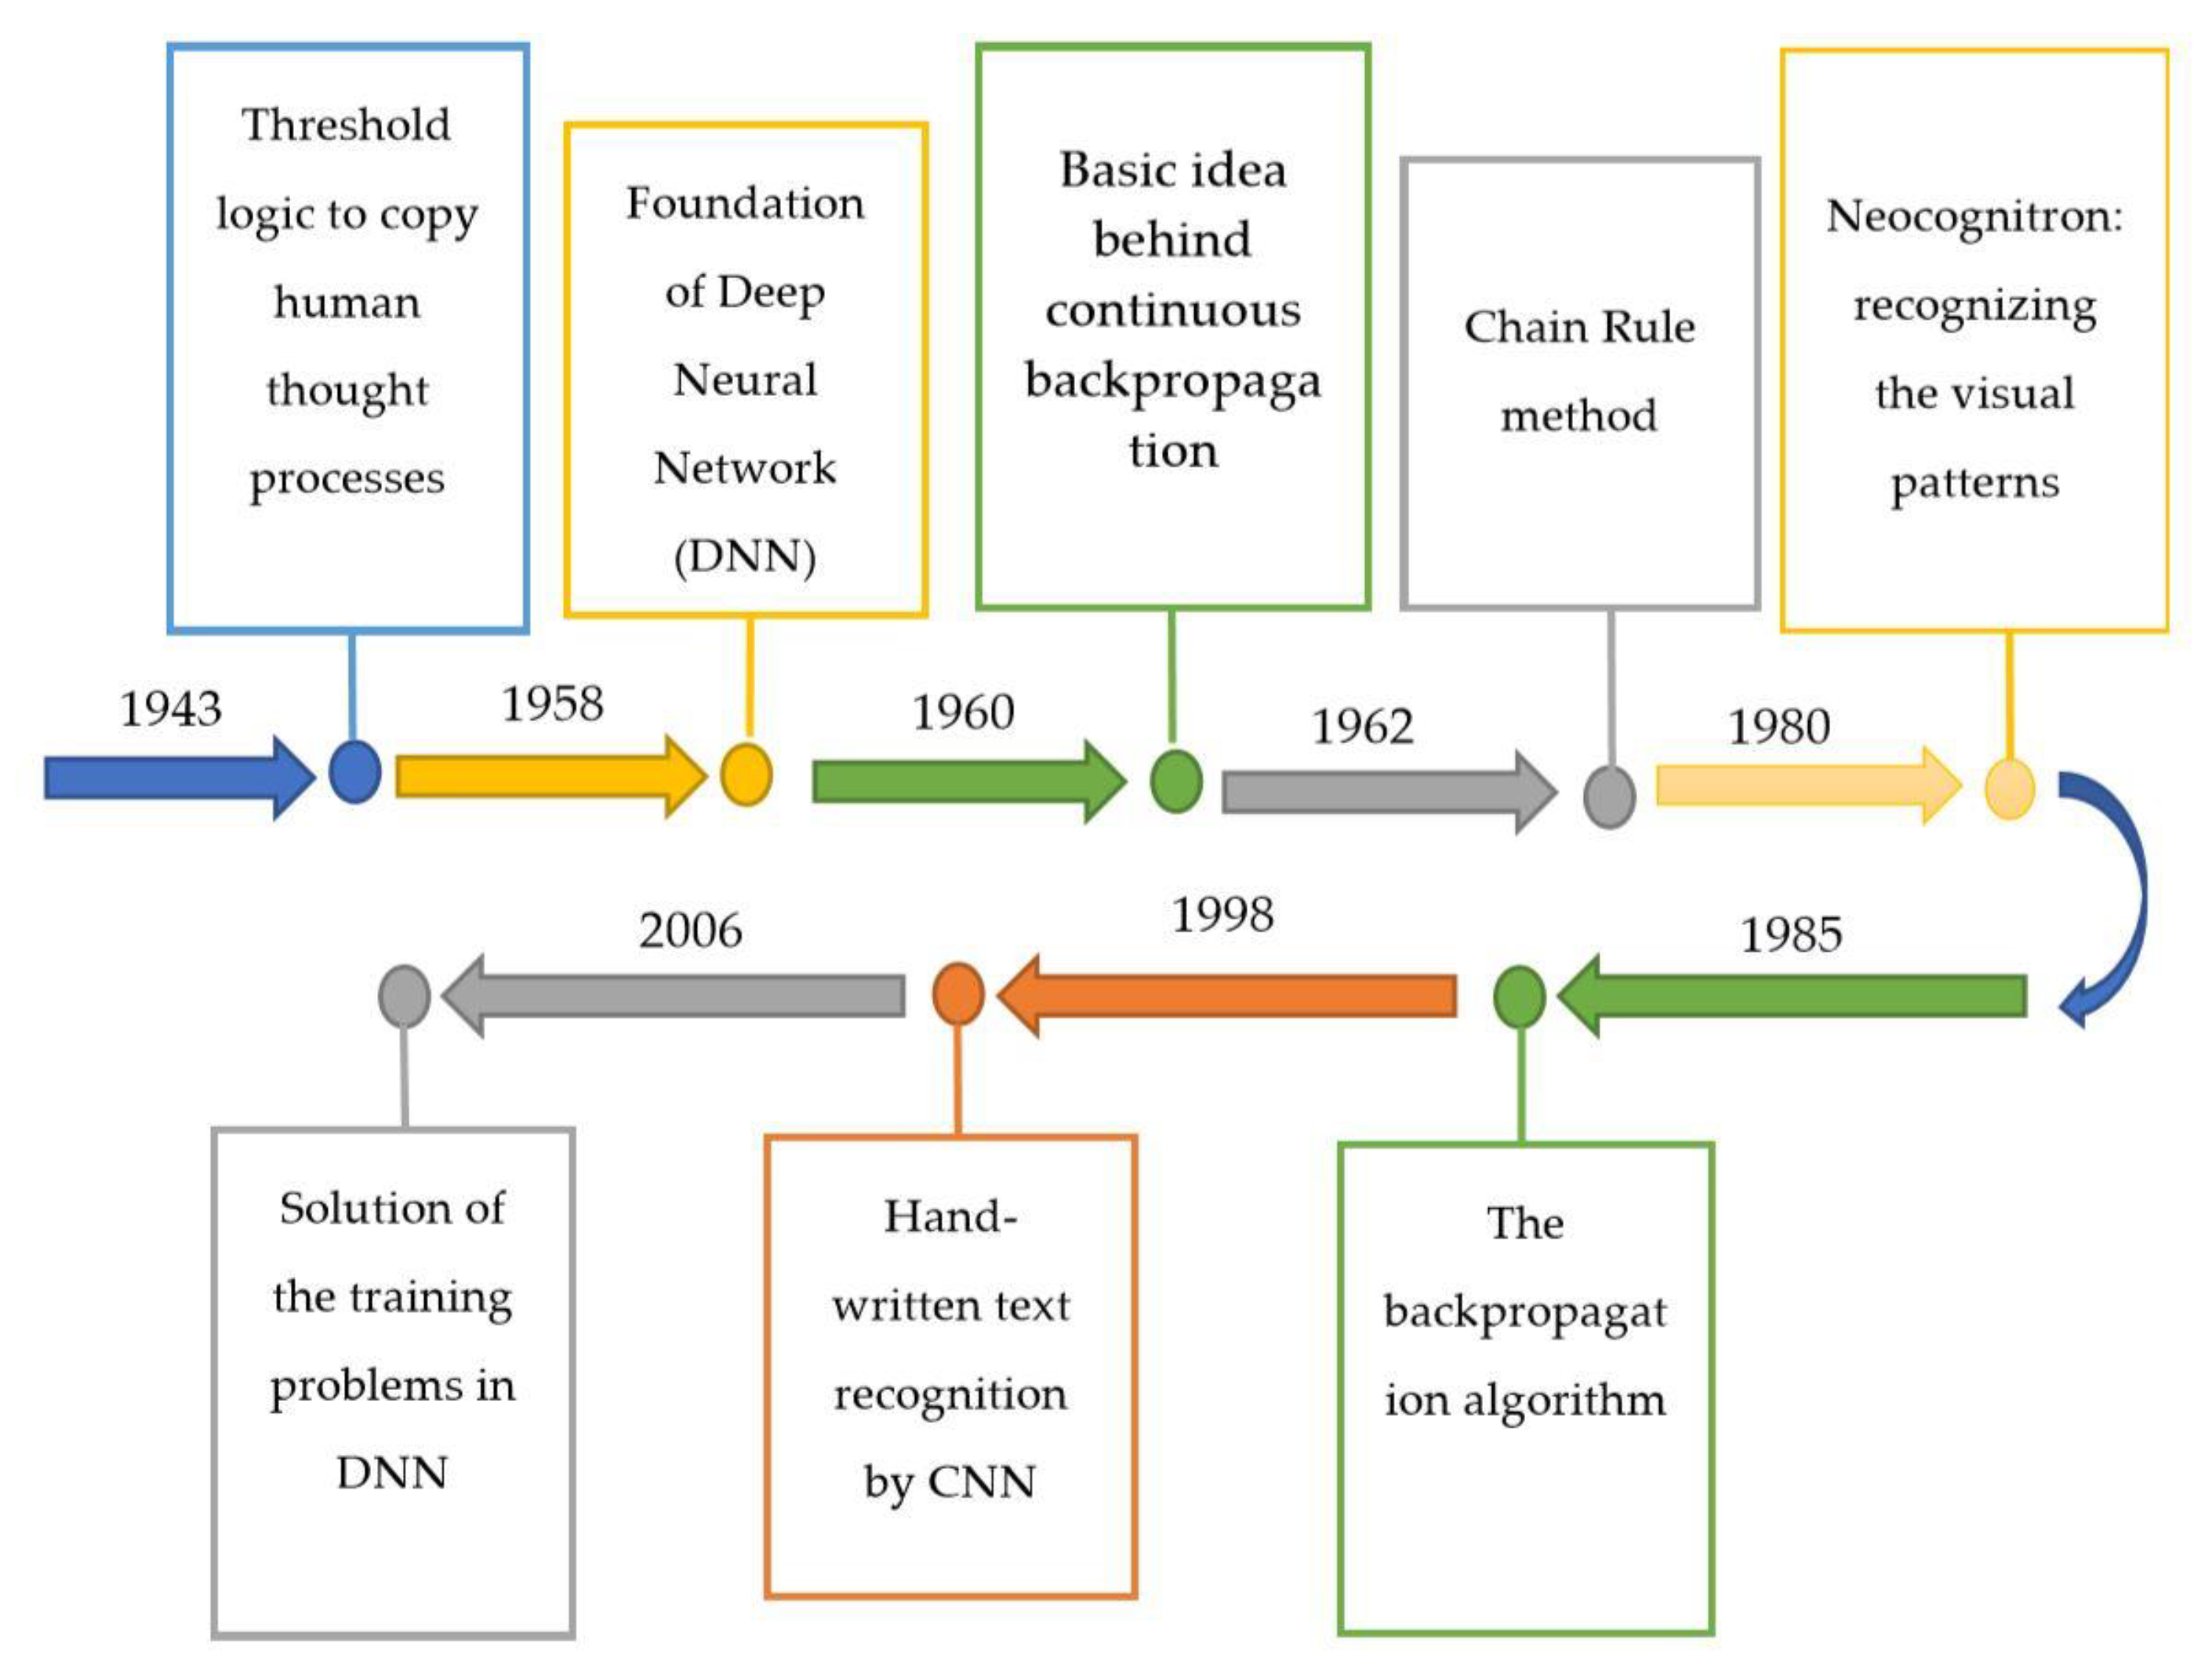 Plants Free Full Text Plant Disease Detection And Classification By Deep Learning Html